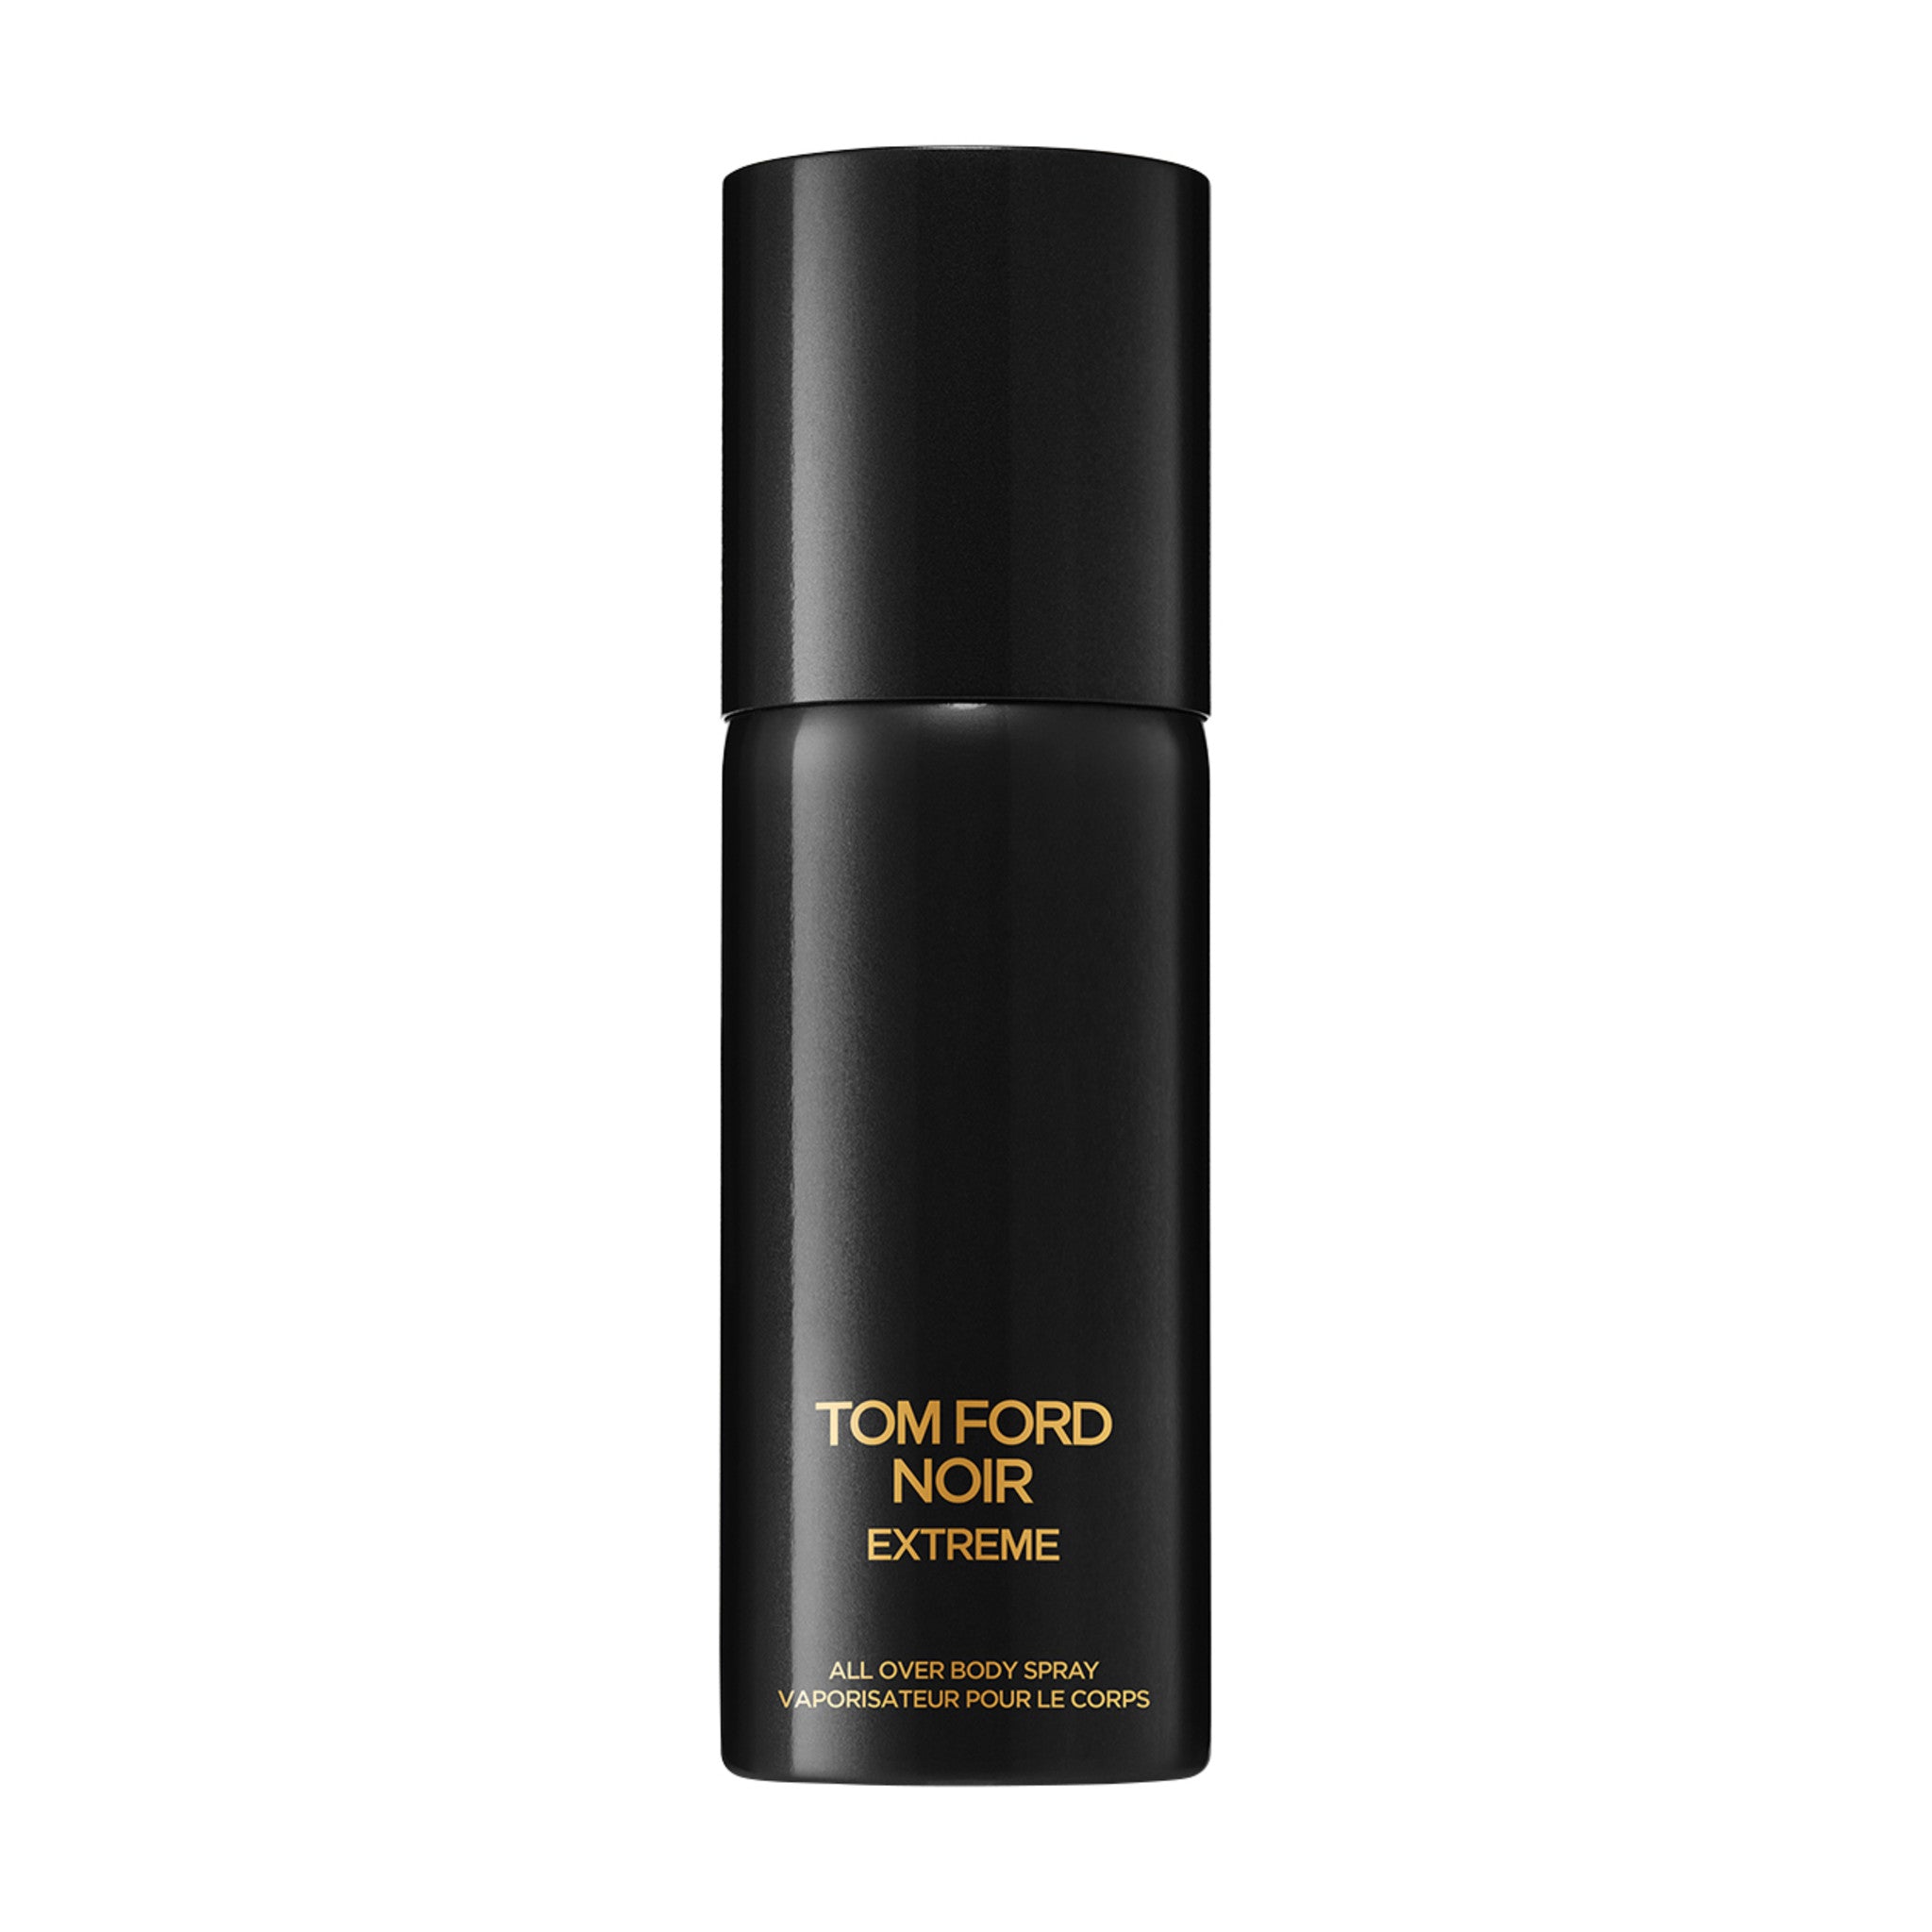 Tom Ford Noir Extreme All Over Body Spray main image.